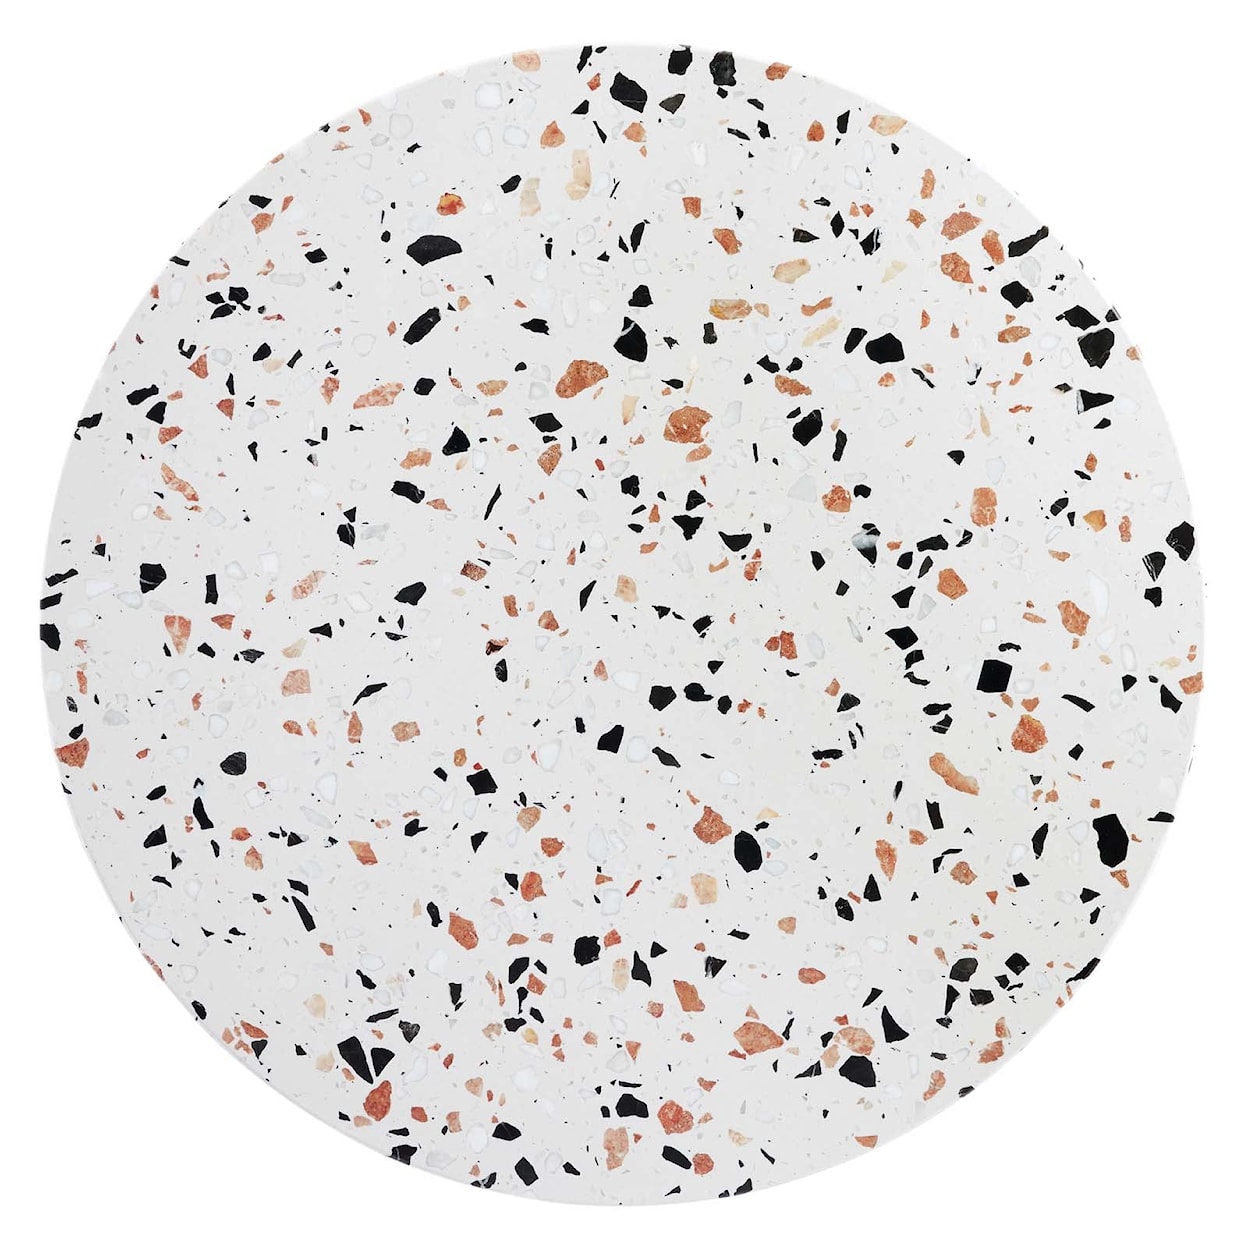 Modway Verne Verne 28" Round Terrazzo Dining Table